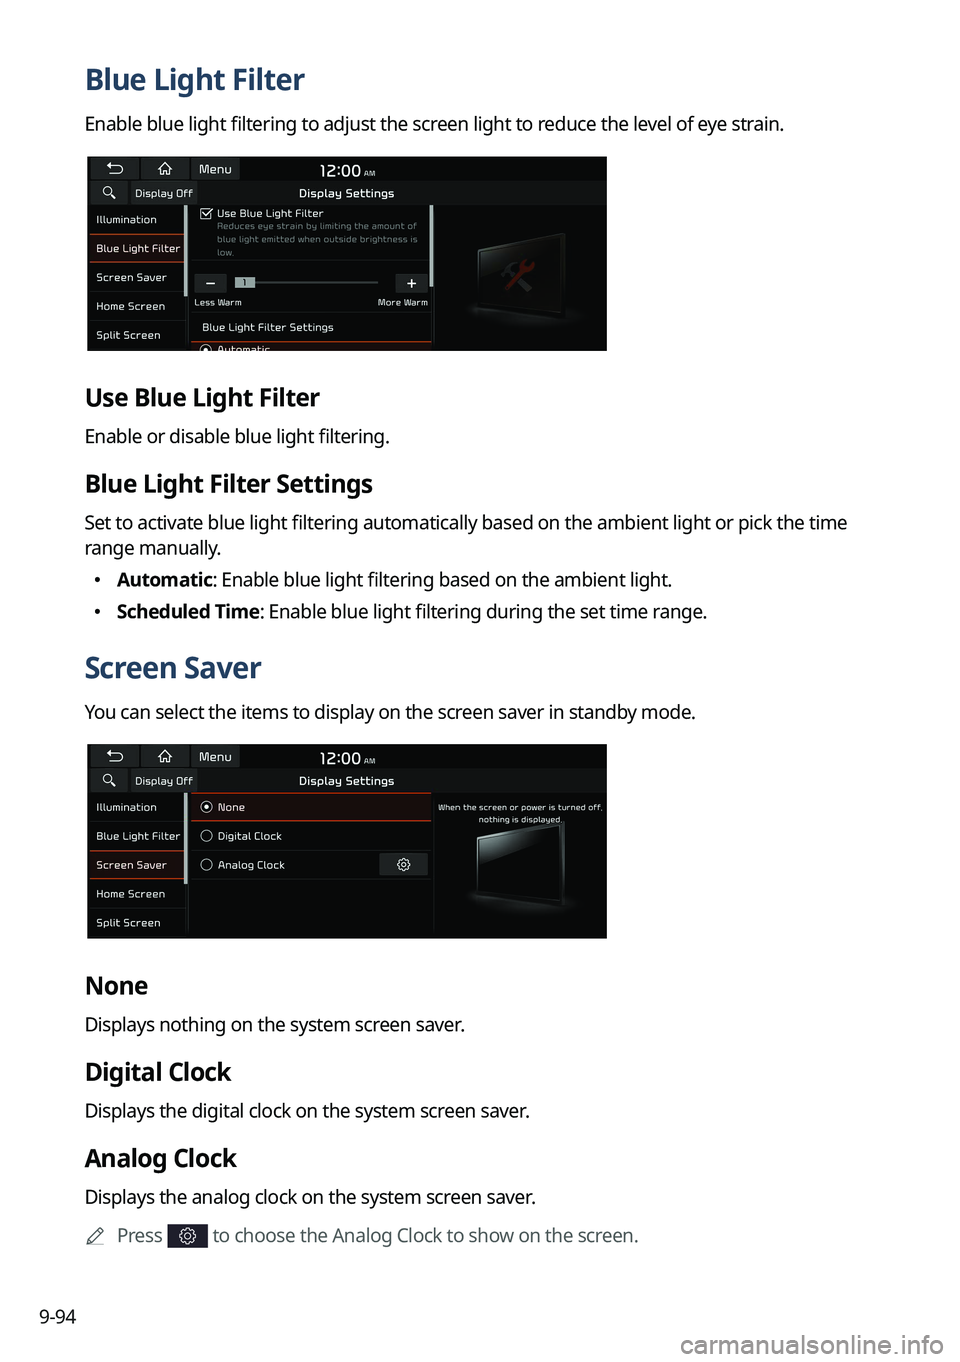 KIA SOUL 2023  Quick Reference Guide 9-94
Blue Light Filter
Enable blue light filtering to adjust the screen light to reduce the level of eye strain.
Use Blue Light Filter
Enable or disable blue light filtering.
Blue Light Filter Setting